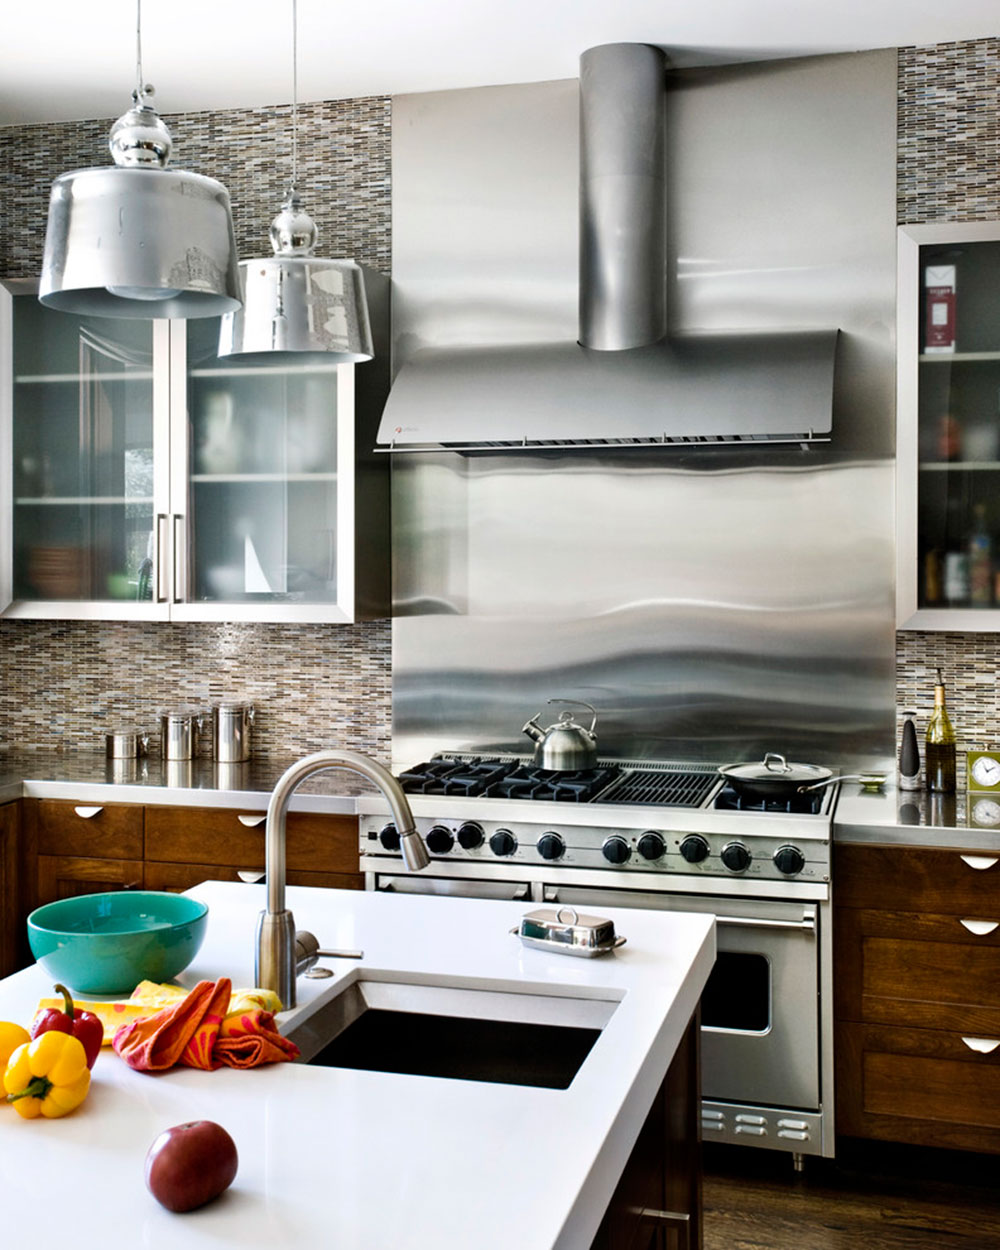 Stainless Steel Backsplash Benefits-Tips-and-Ideas1 Stainless Steel Backsplash - Benefits, Tips, and Ideas